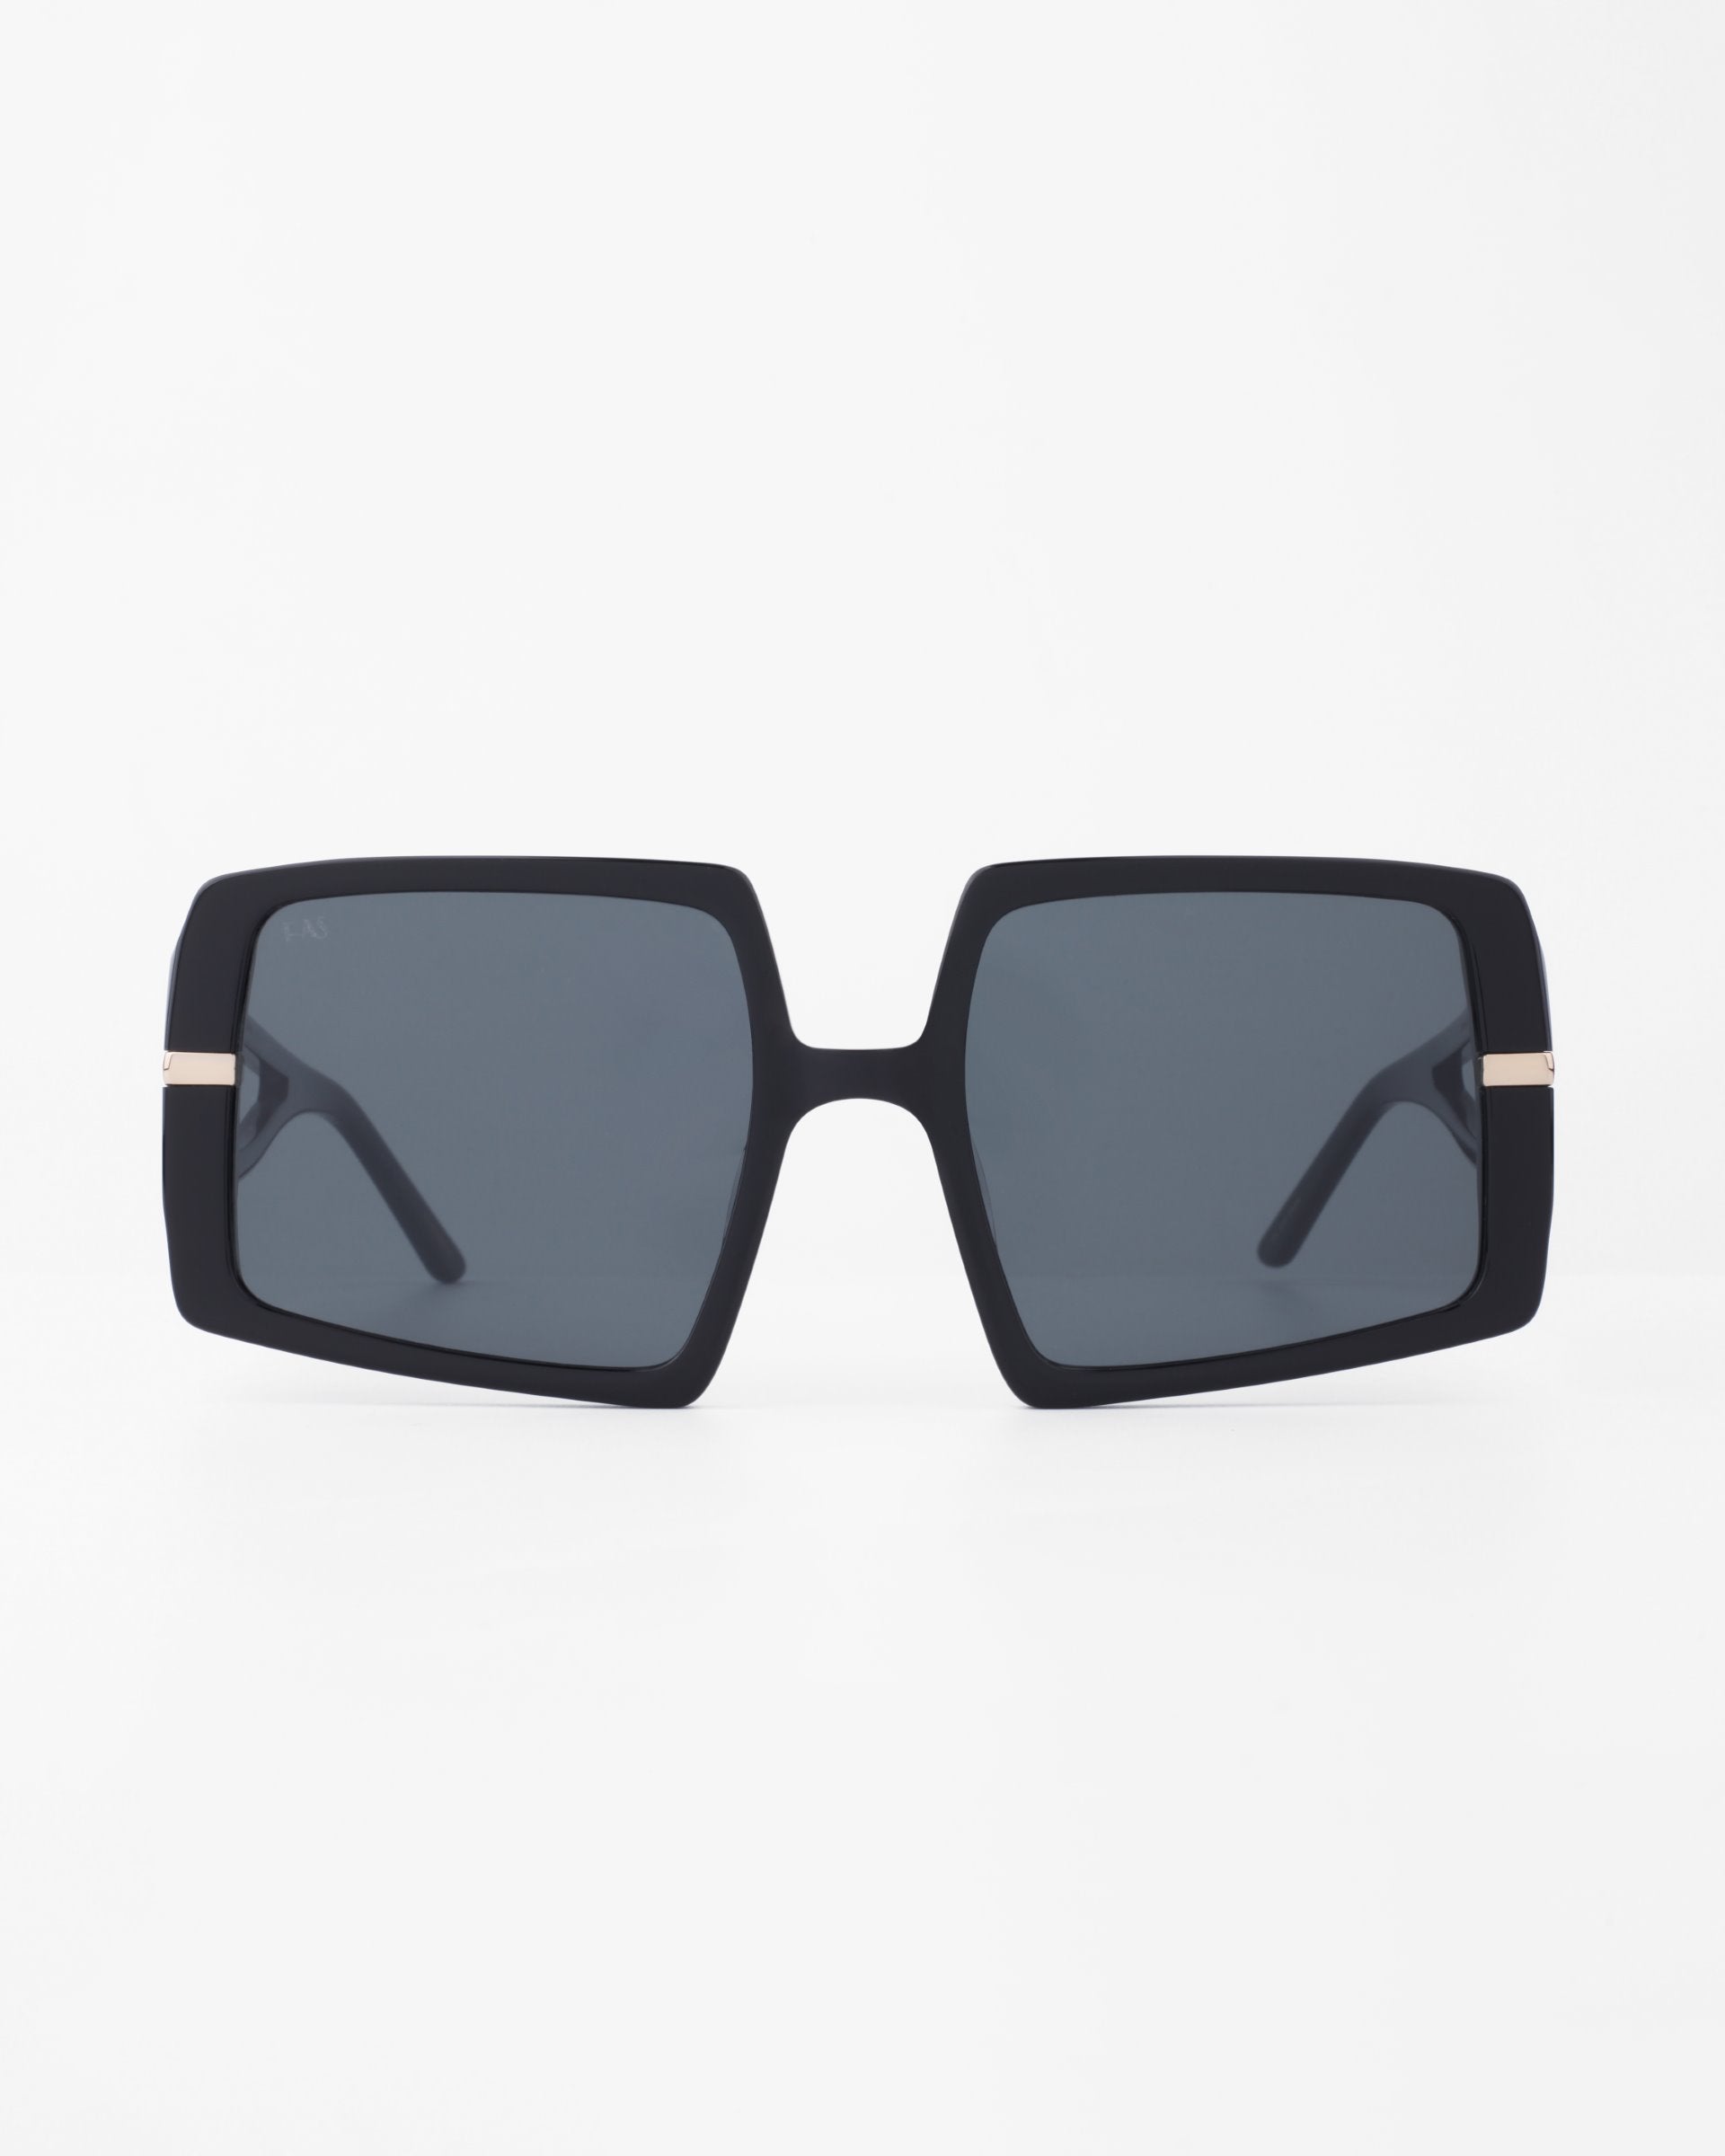 A pair of oversized, black-framed sunglasses with square, shatter-resistant nylon lenses. The darkly tinted lenses are complemented by a plant-based acetate frame featuring a small, 18-karat gold-plated accent on the temples near the hinges. The background is plain white. This is the Saturday by For Art&#39;s Sake®.